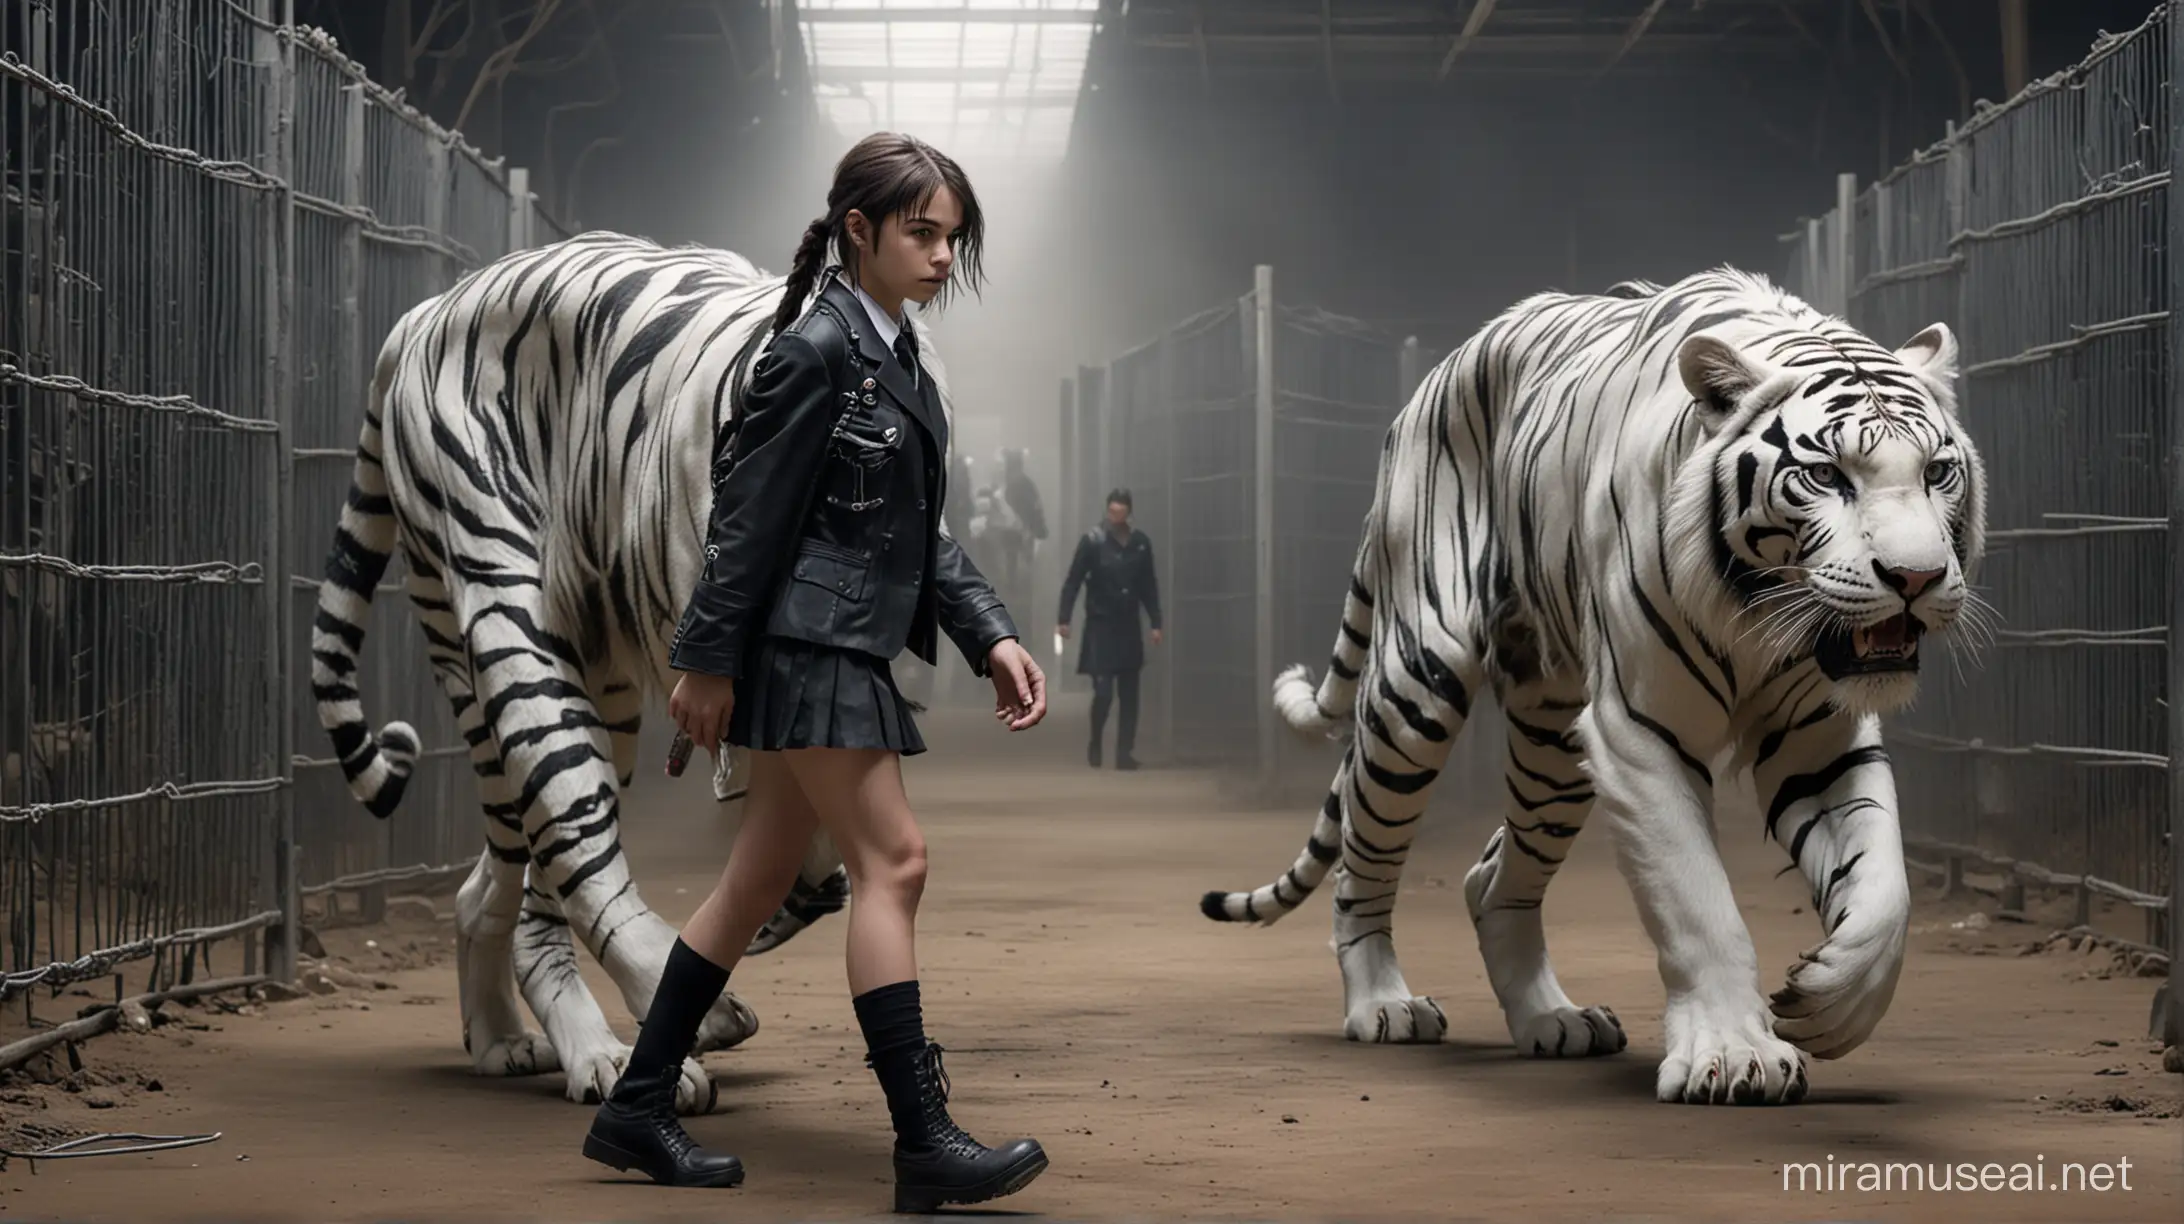 Punk schoolgirl walking alongside a large maltese tiger, participating in an underground cage match, futuristic.